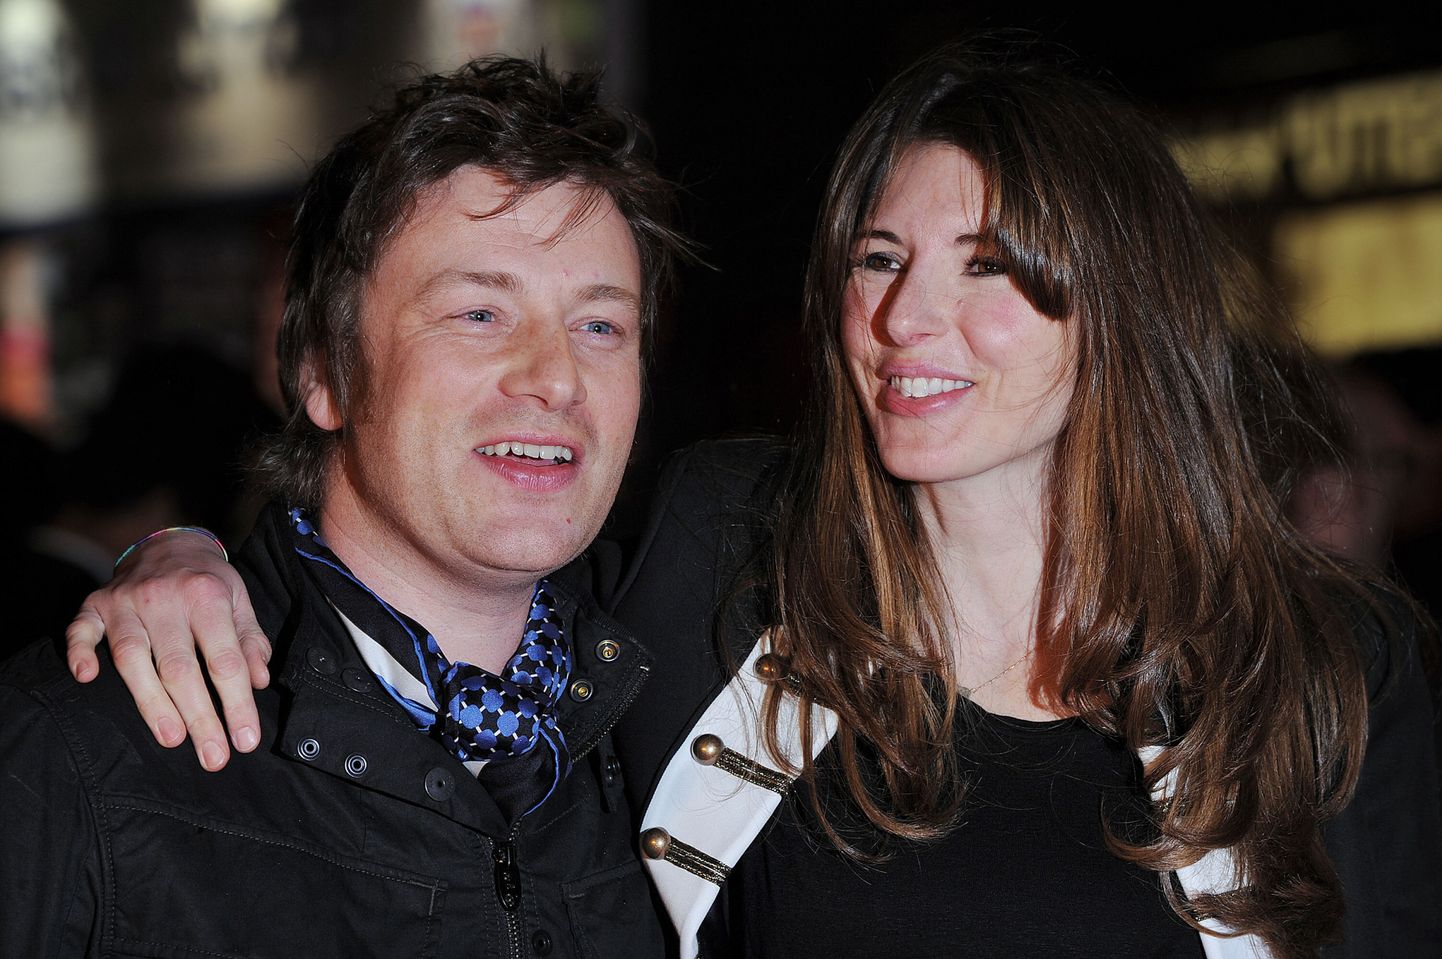 British chef Jamie Oliver (L) and his wife Jools smile as they arrive to the European premiere of new movie "Kick-Ass" in London on March 22, 2010.  AFP PHOTO/ BEN STANSALL